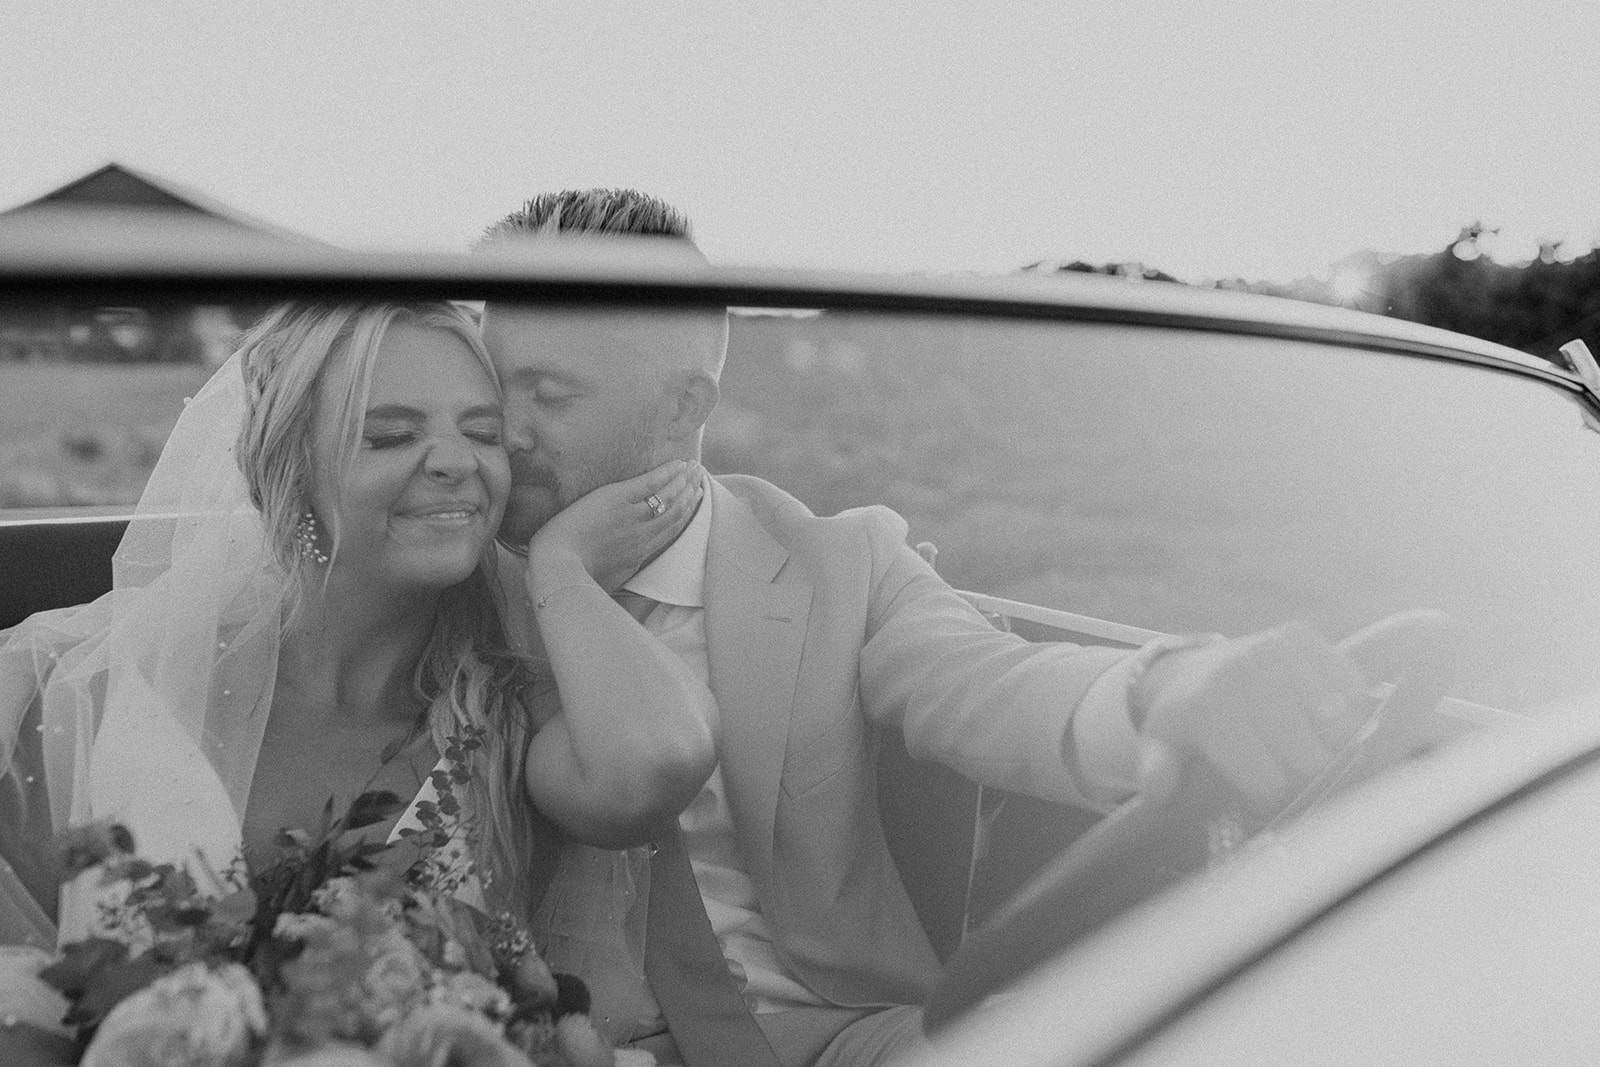 Golden hour photos of bride and groom in a beautiful classic car